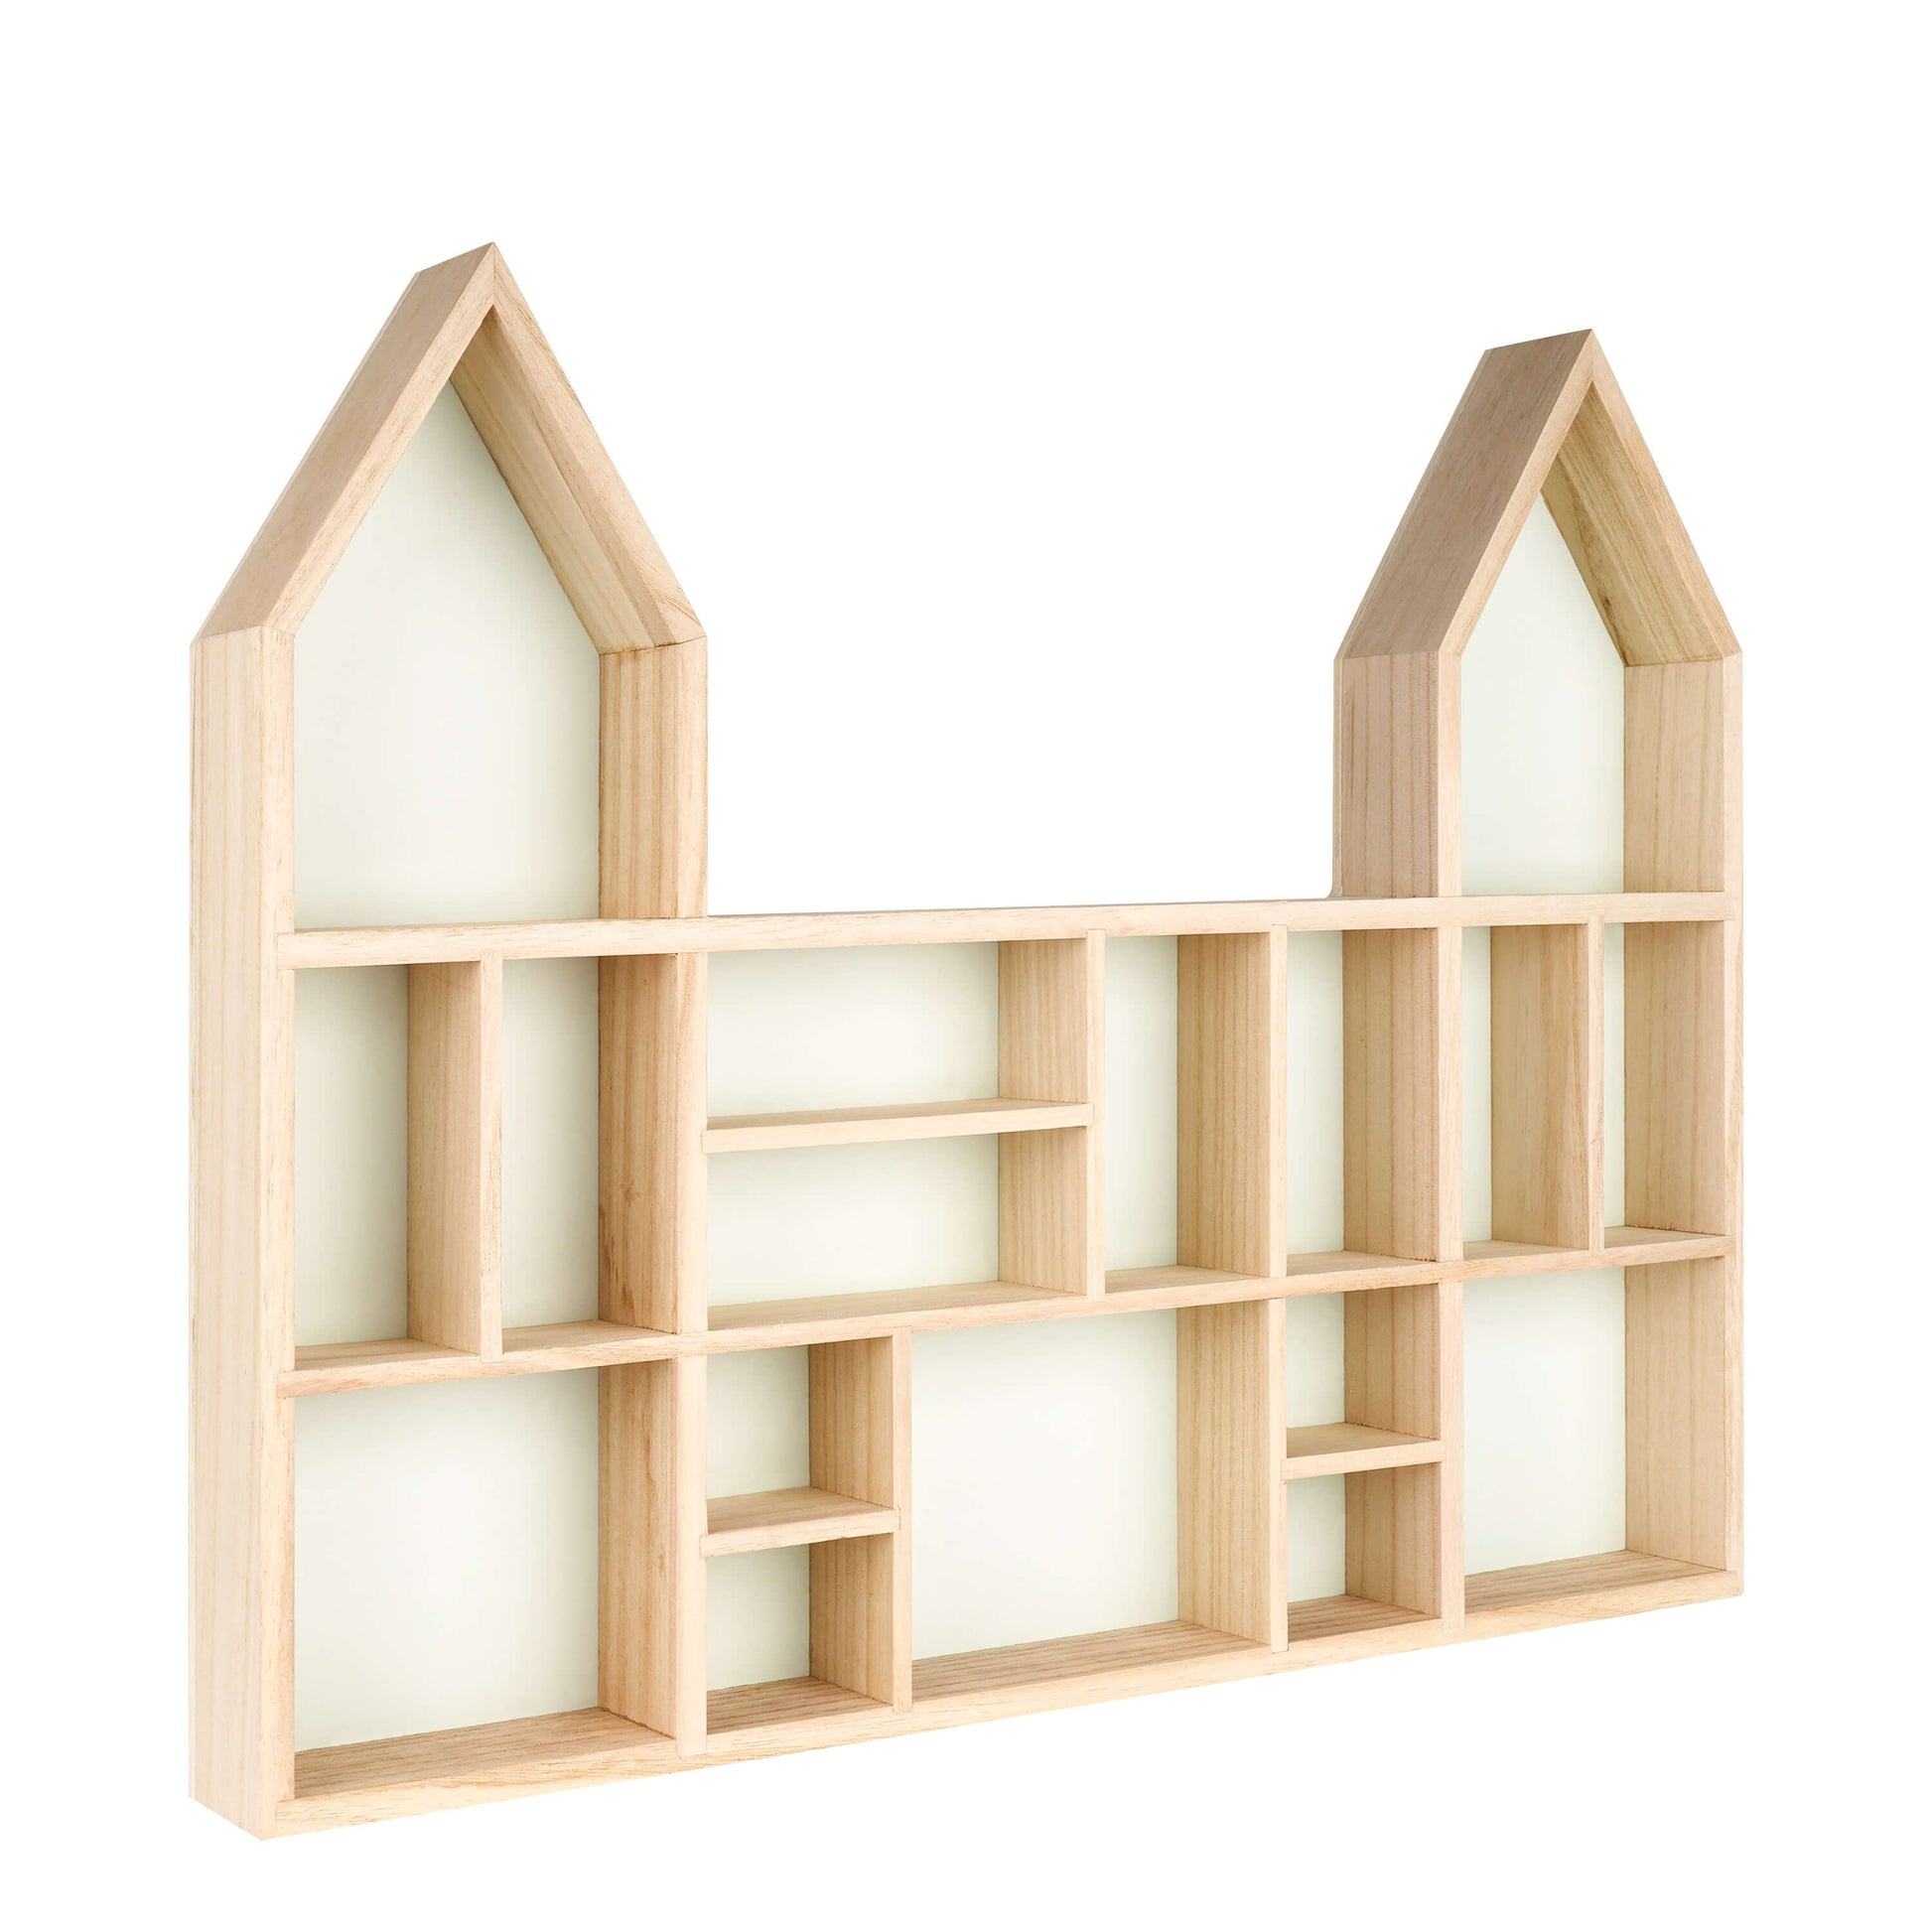 Castle shaped wooden toy display shelf with a mint-colored backboard ( Empty, side view)